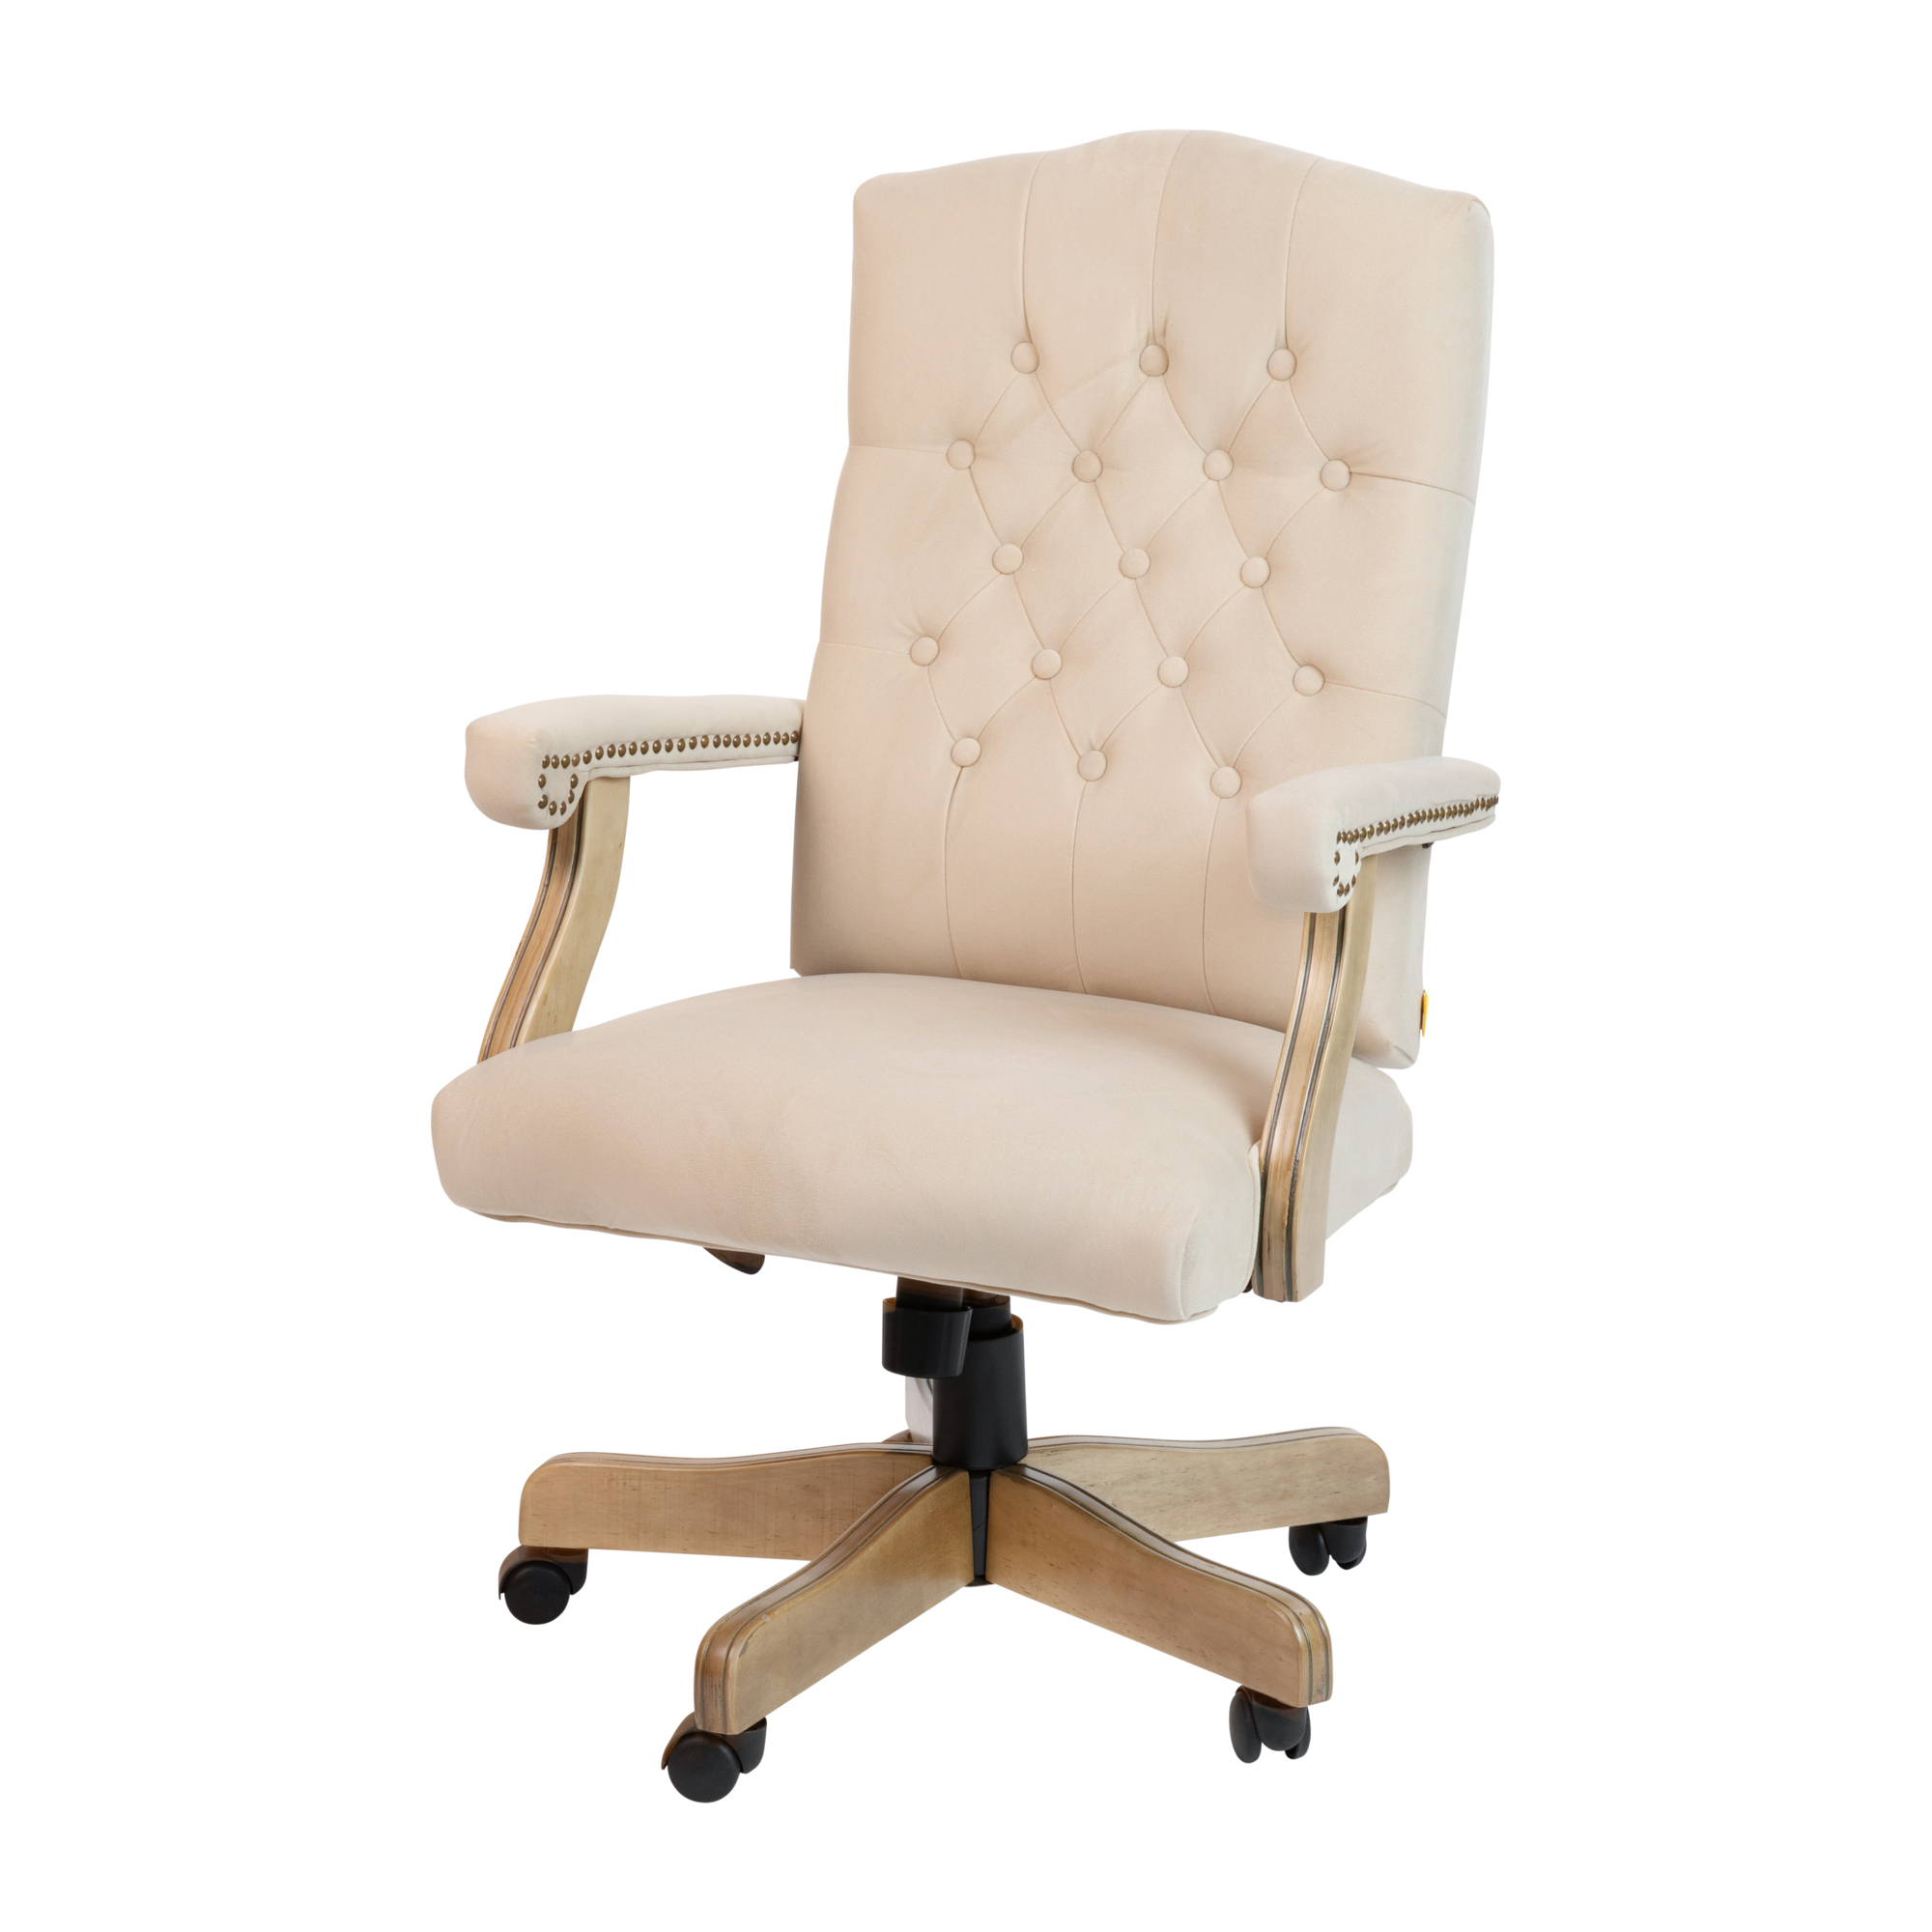 Flash Furniture, Ivory Microfiber Classic Executive Office Chair, Primary Color Off White, Included (qty.) 1, Model 802IV